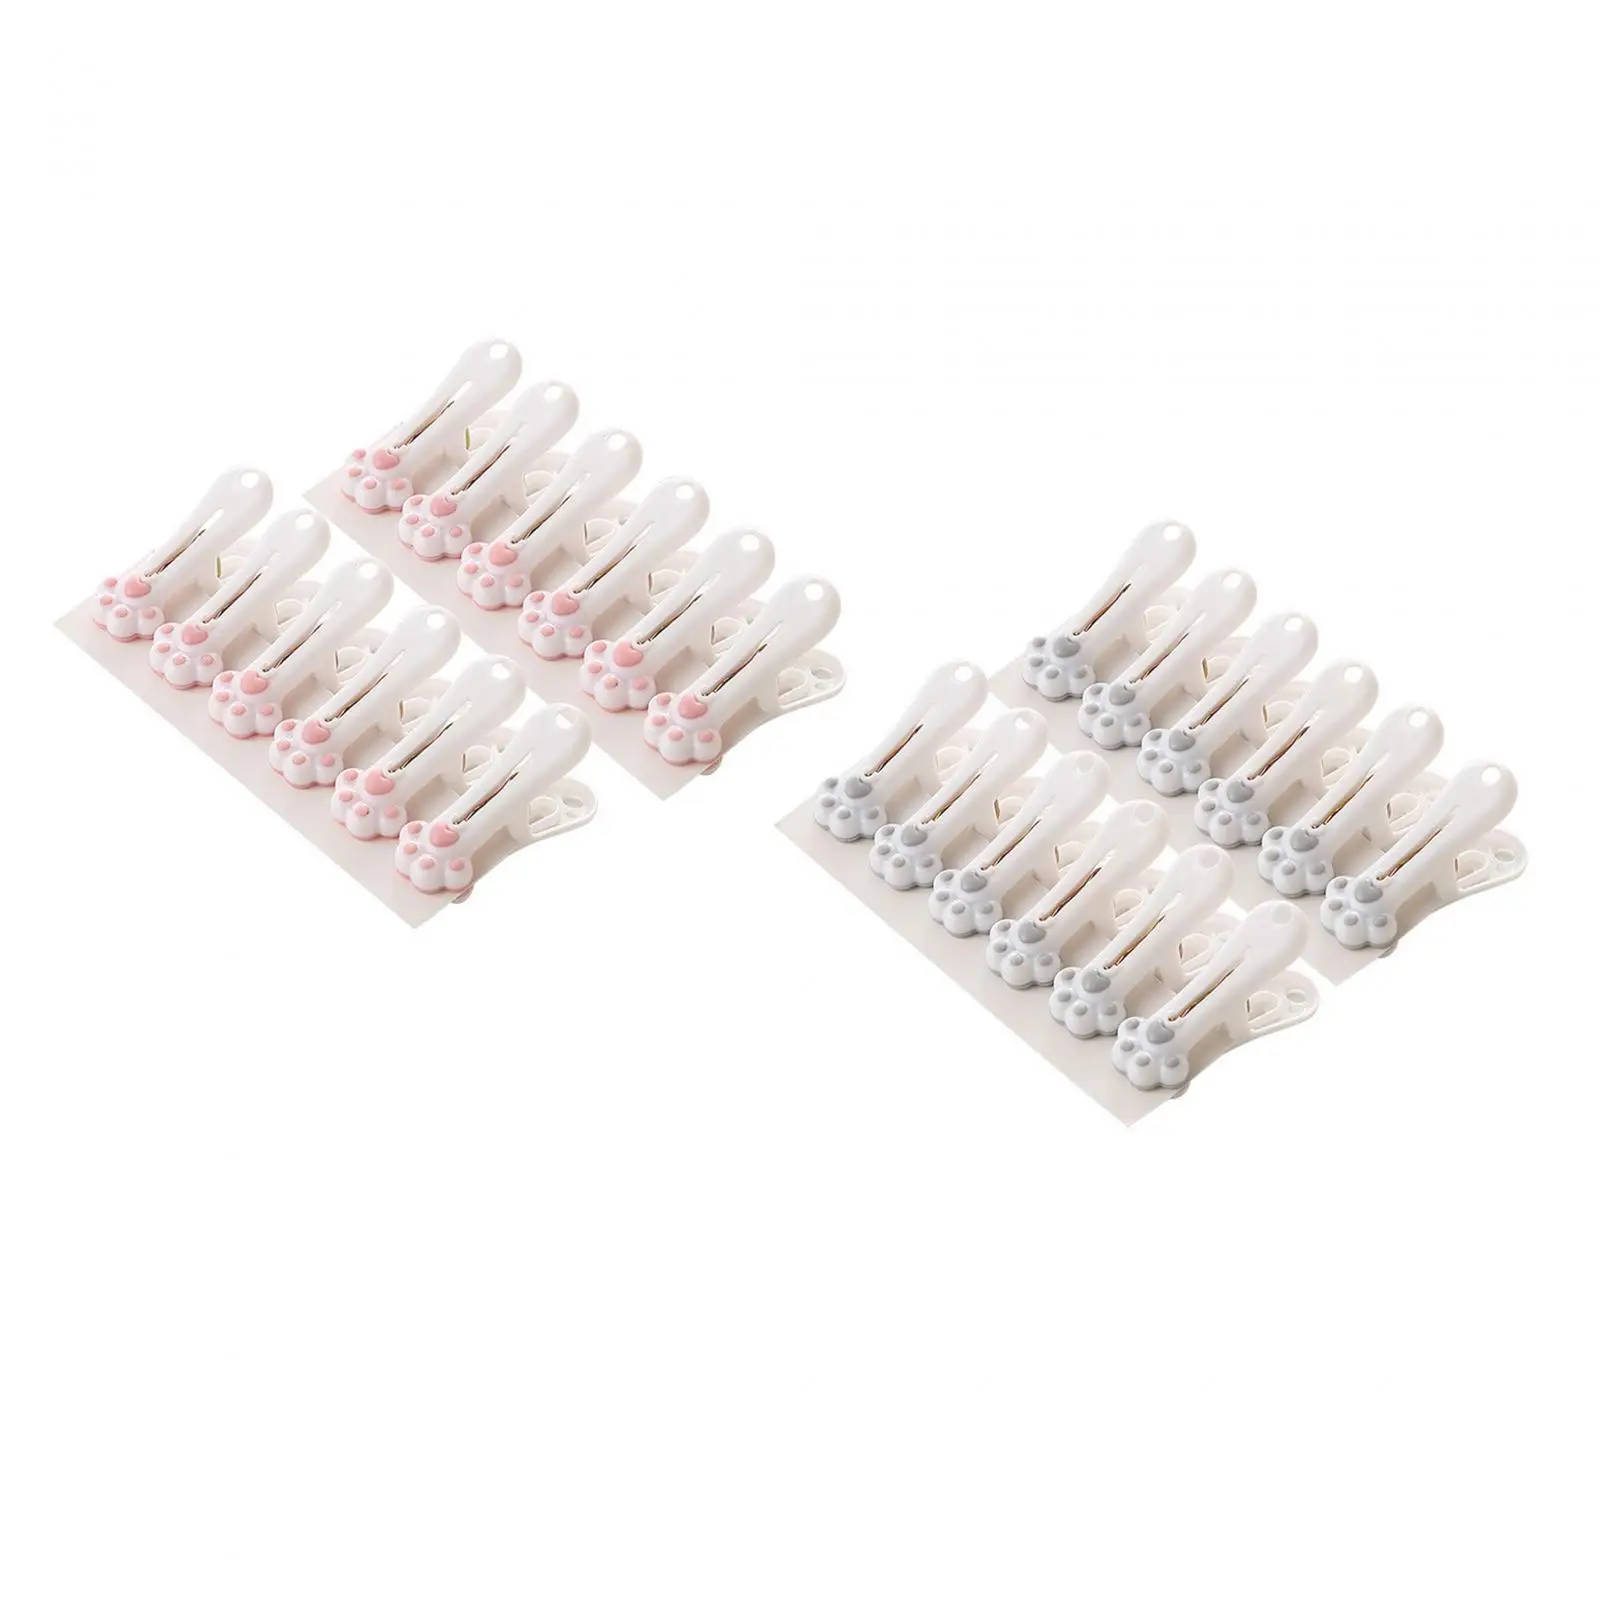 12Pcs Clothespins Cute Clothes Drying Rack Stable Underwear Hangers Sock Hangers Clothes Pins for Underwear Trouser Girls Women